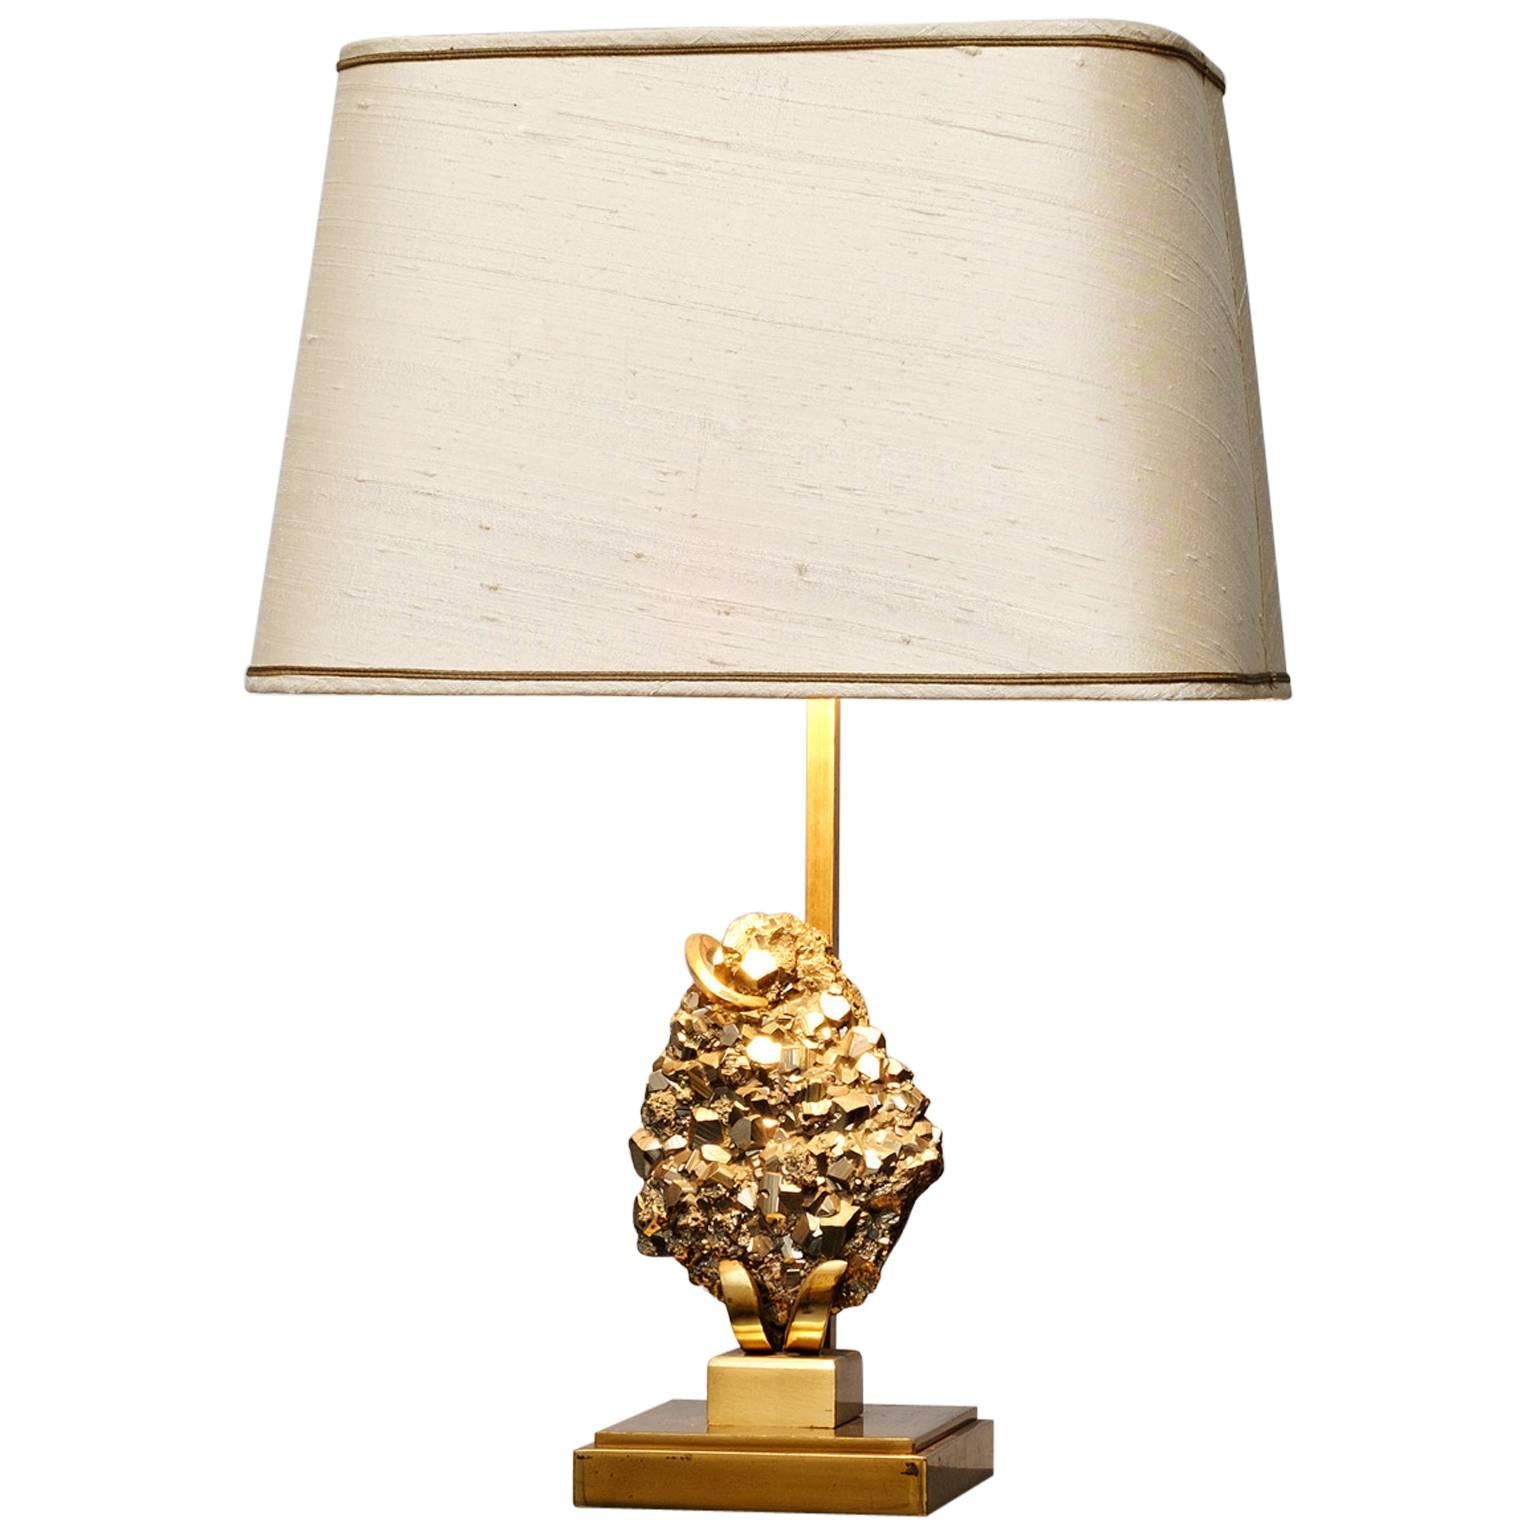 Willy Daro Table Lamp in Brass and Agate